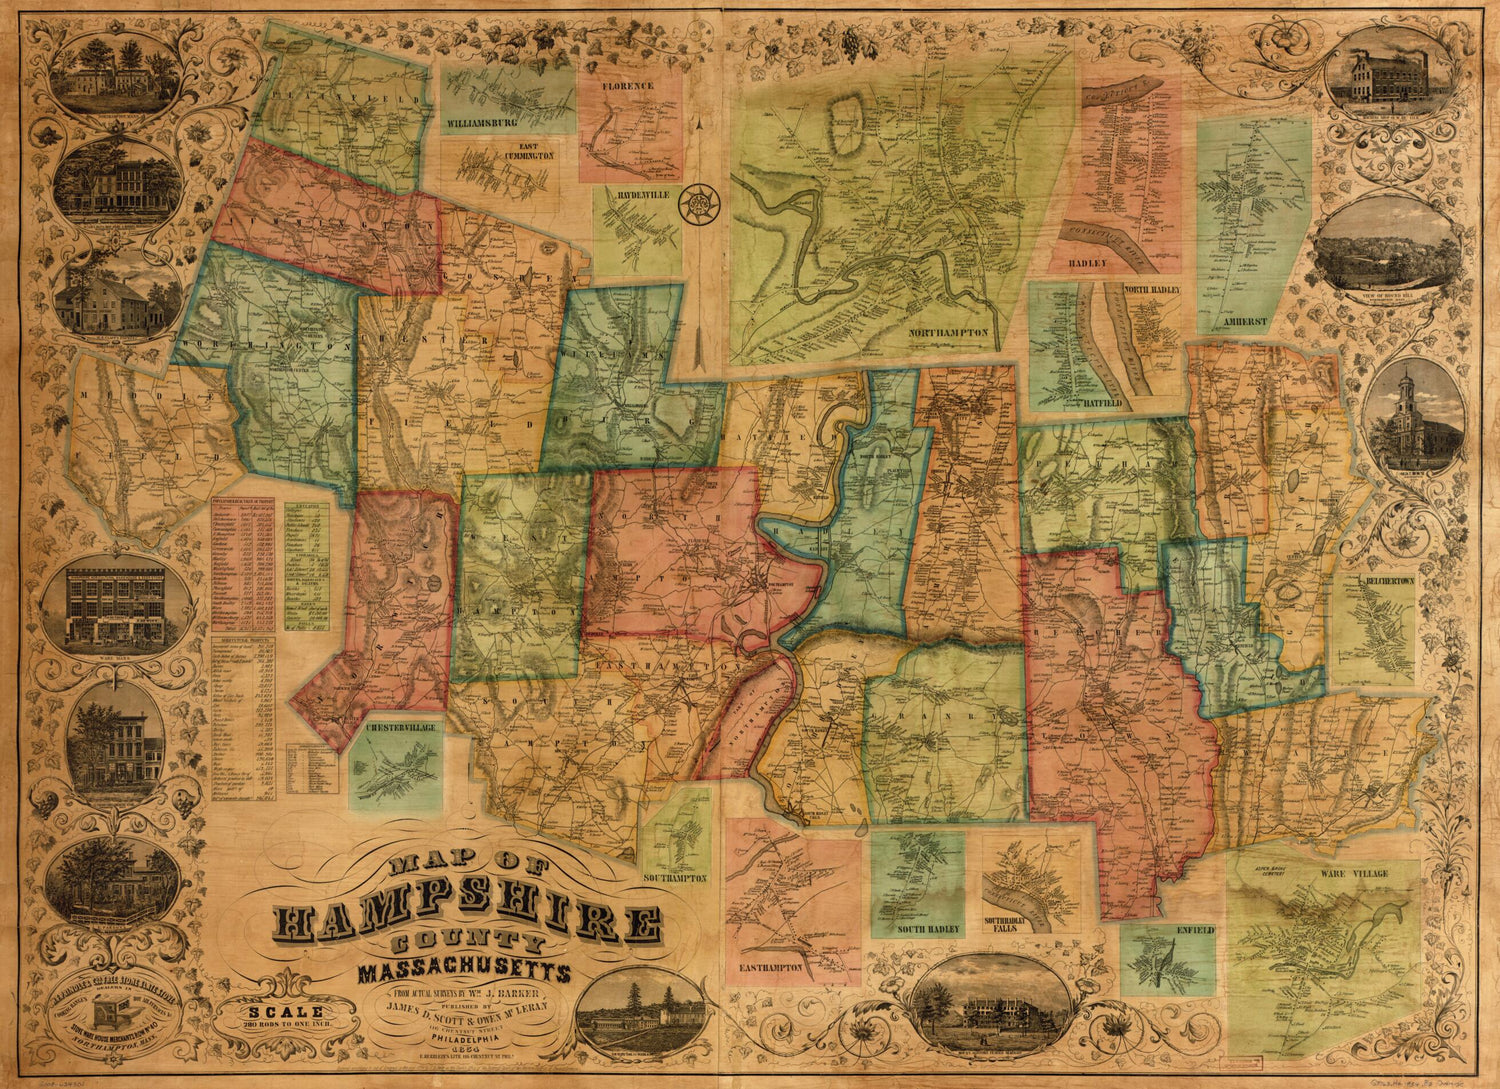 This old map of Map of Hampshire County, Massachusetts from 1854 was created by Wm. J. (William J.) Barker,  E. Herrlein&